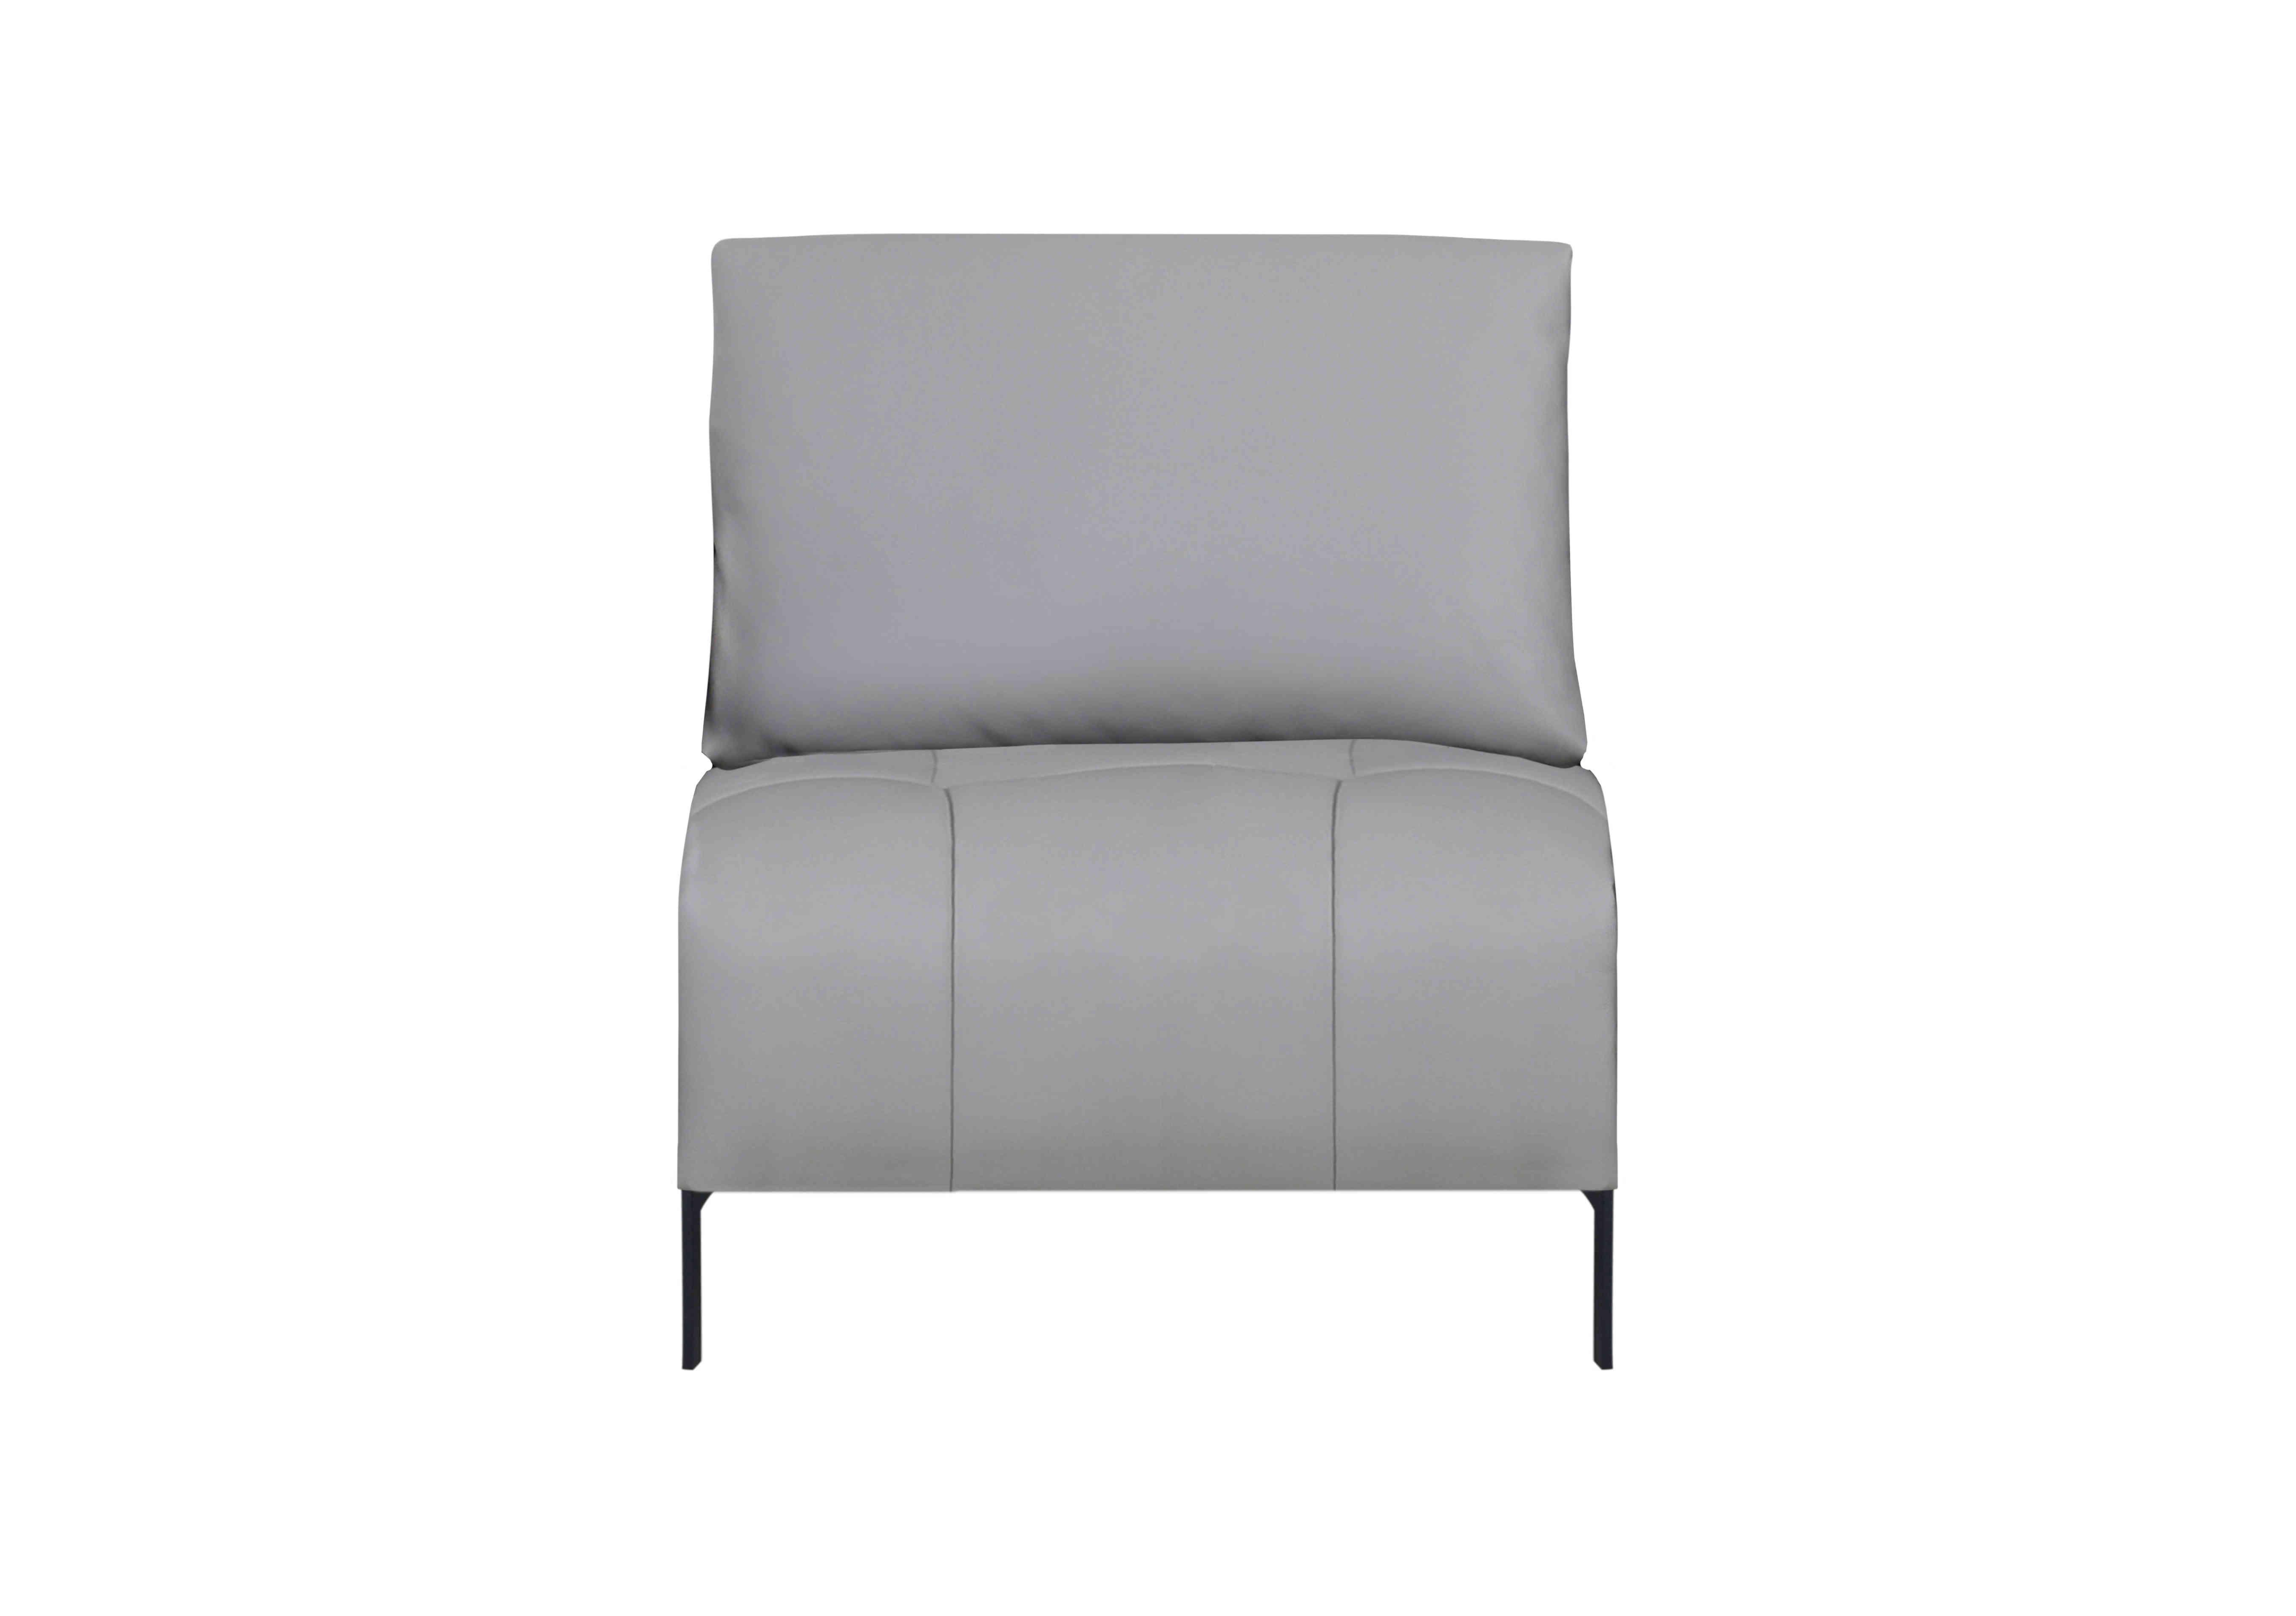 Lawson Leather 1.5 Seater Armless Unit in Np-516e Light Grey on Furniture Village